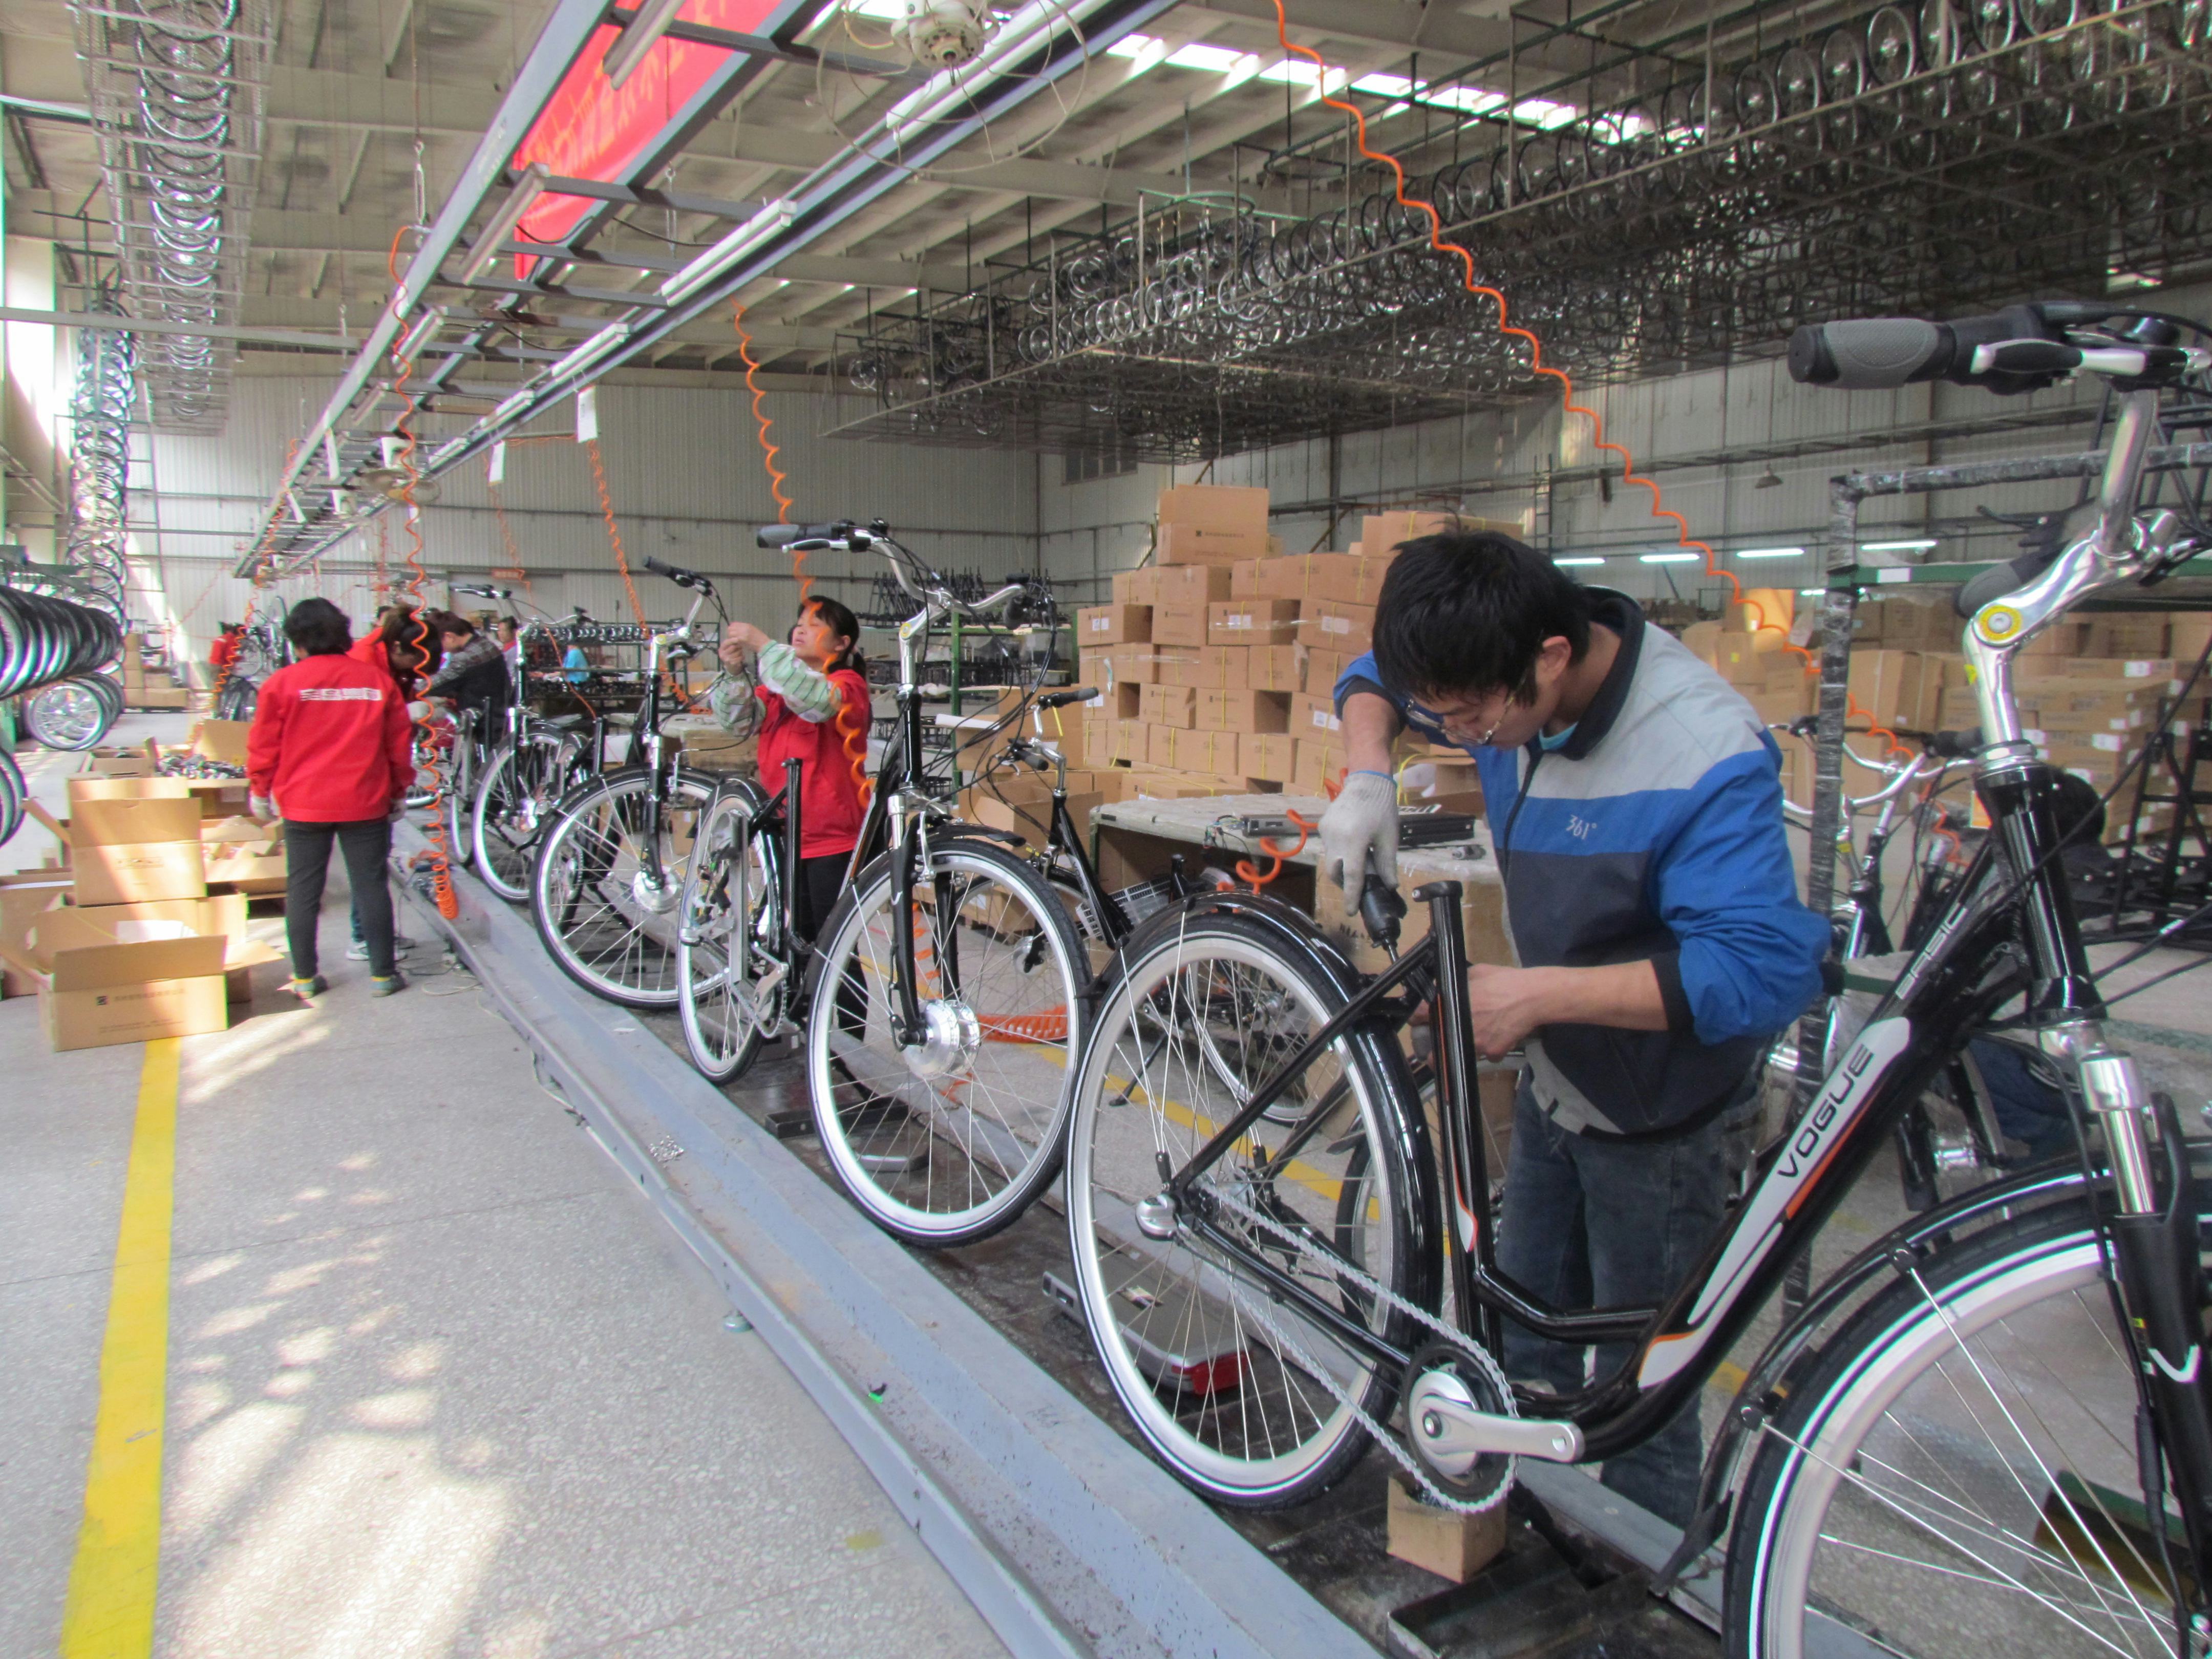 Production at Bodo Vehicle Group Co. Ltd. This is one of the companies which would be hardest hit by proposed dumping duties. – Photo Bike Europe